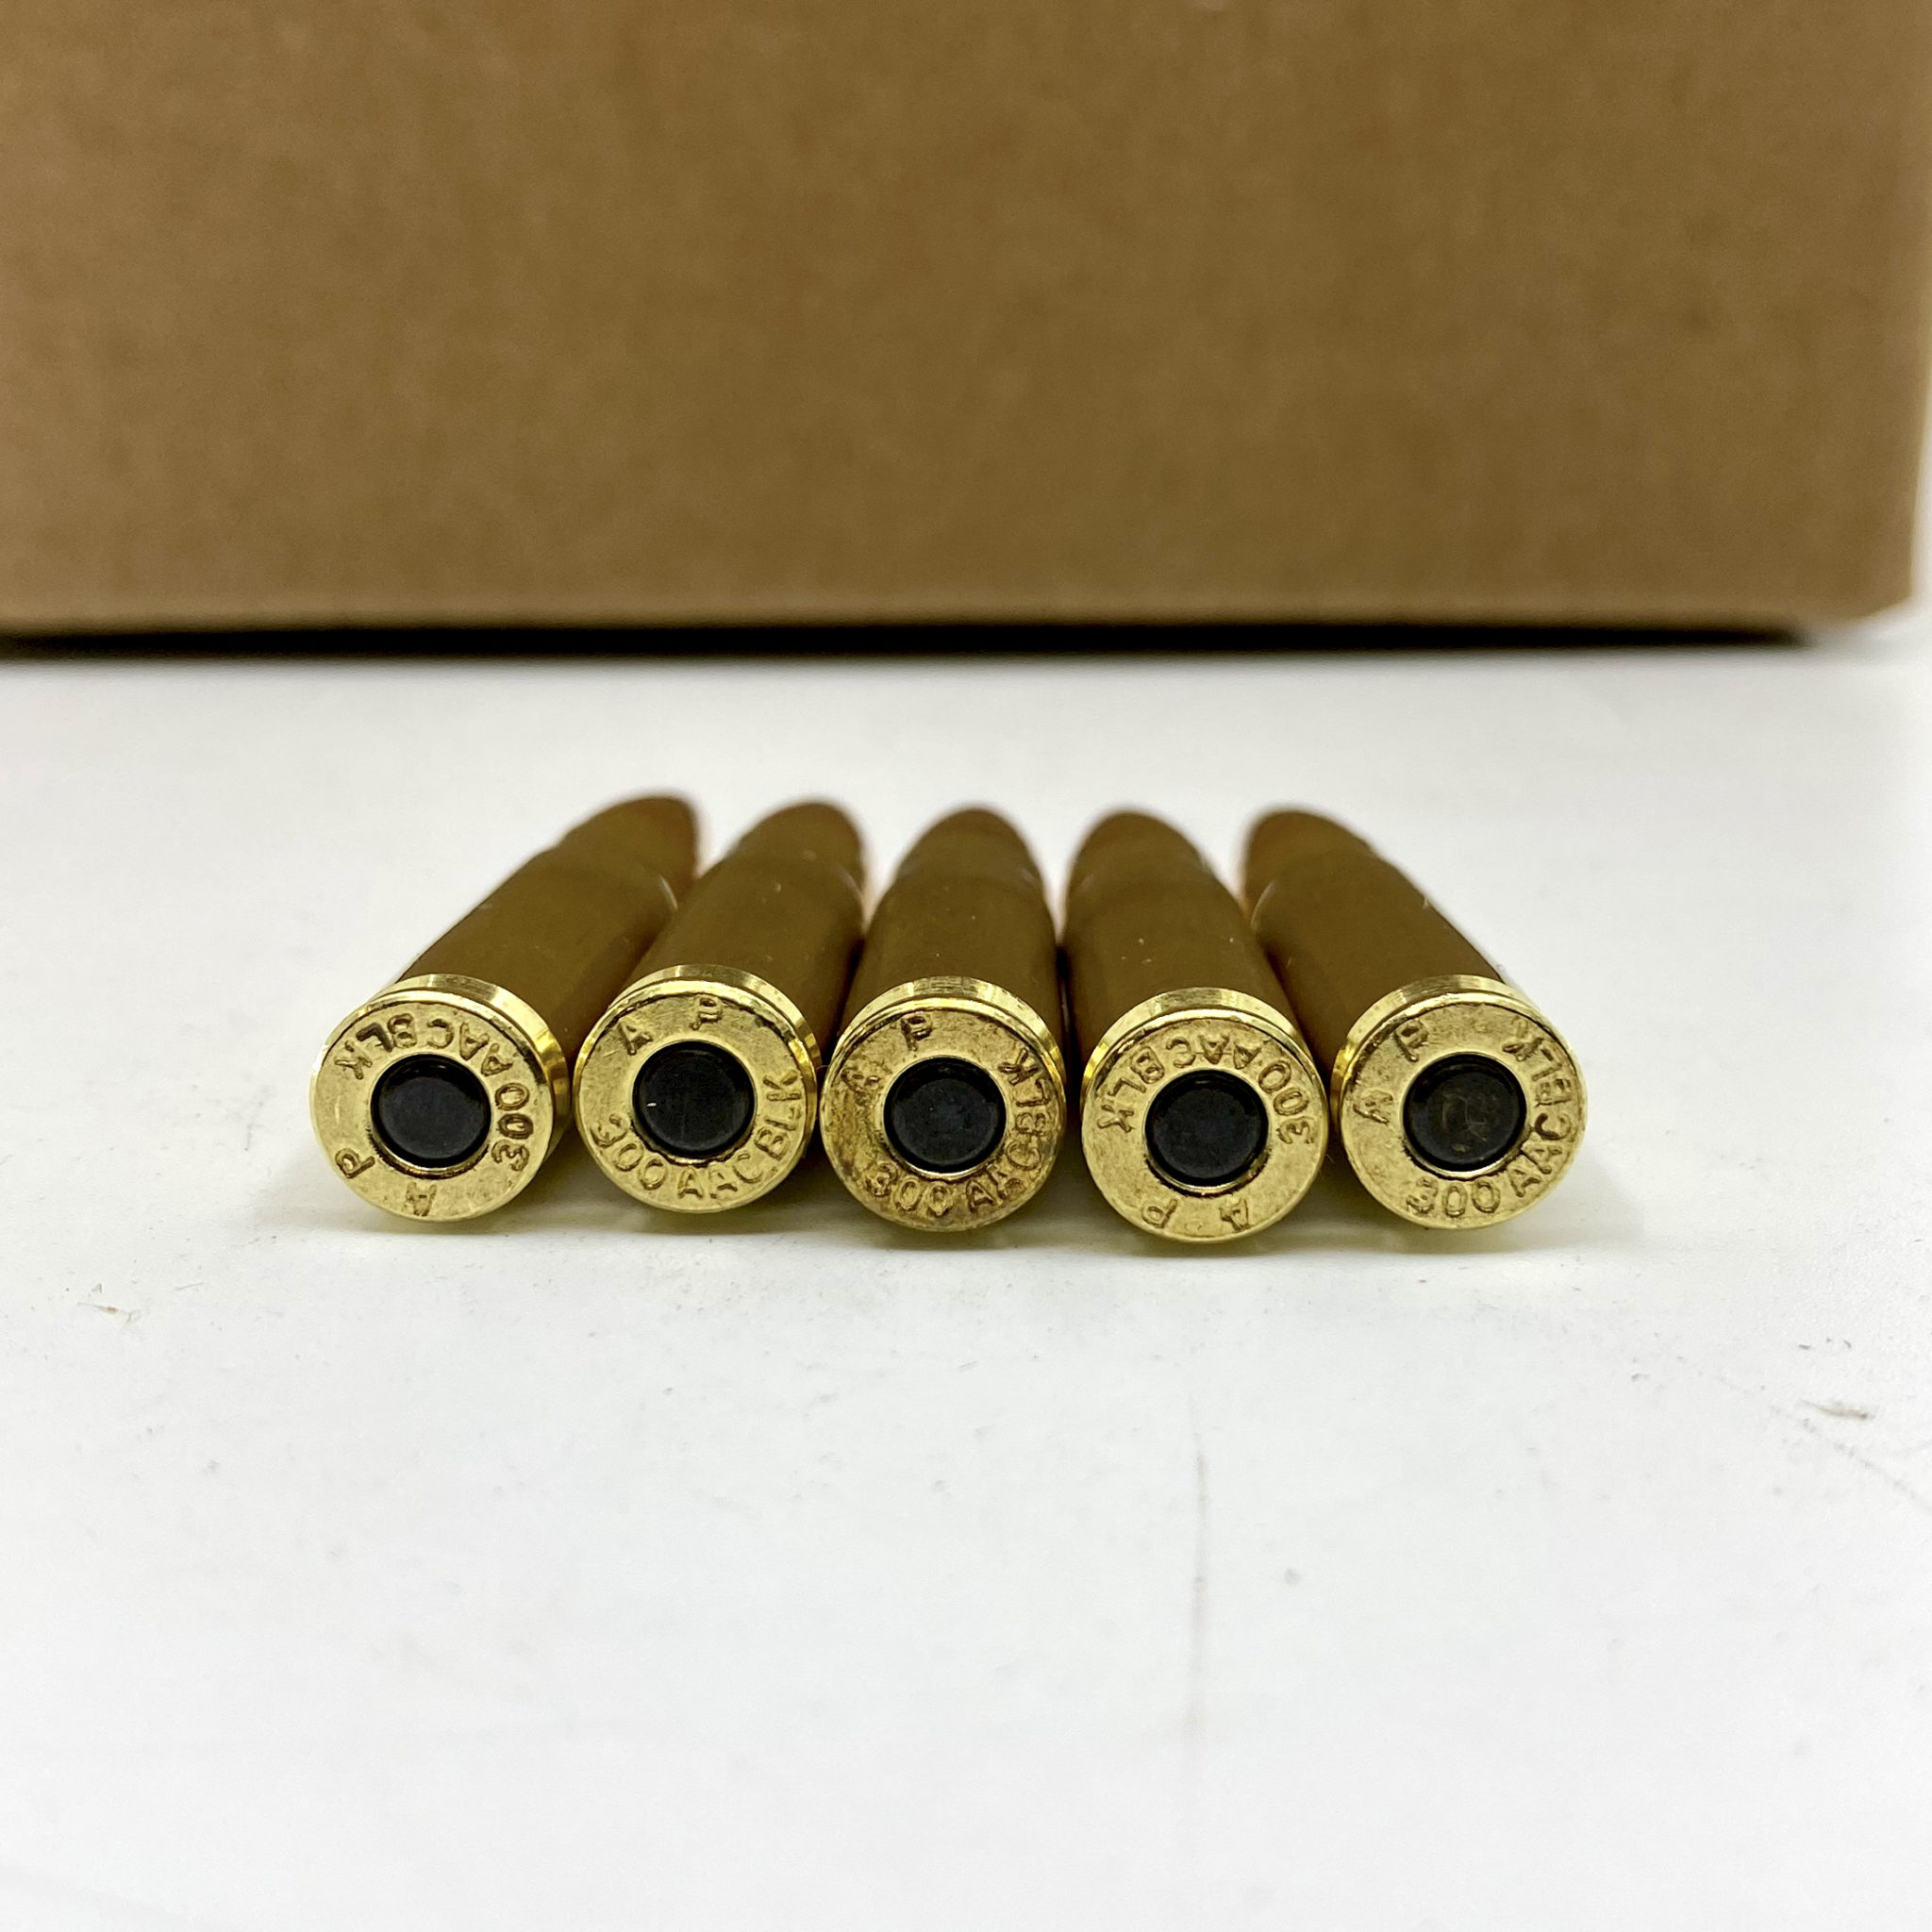 300 black out ammo